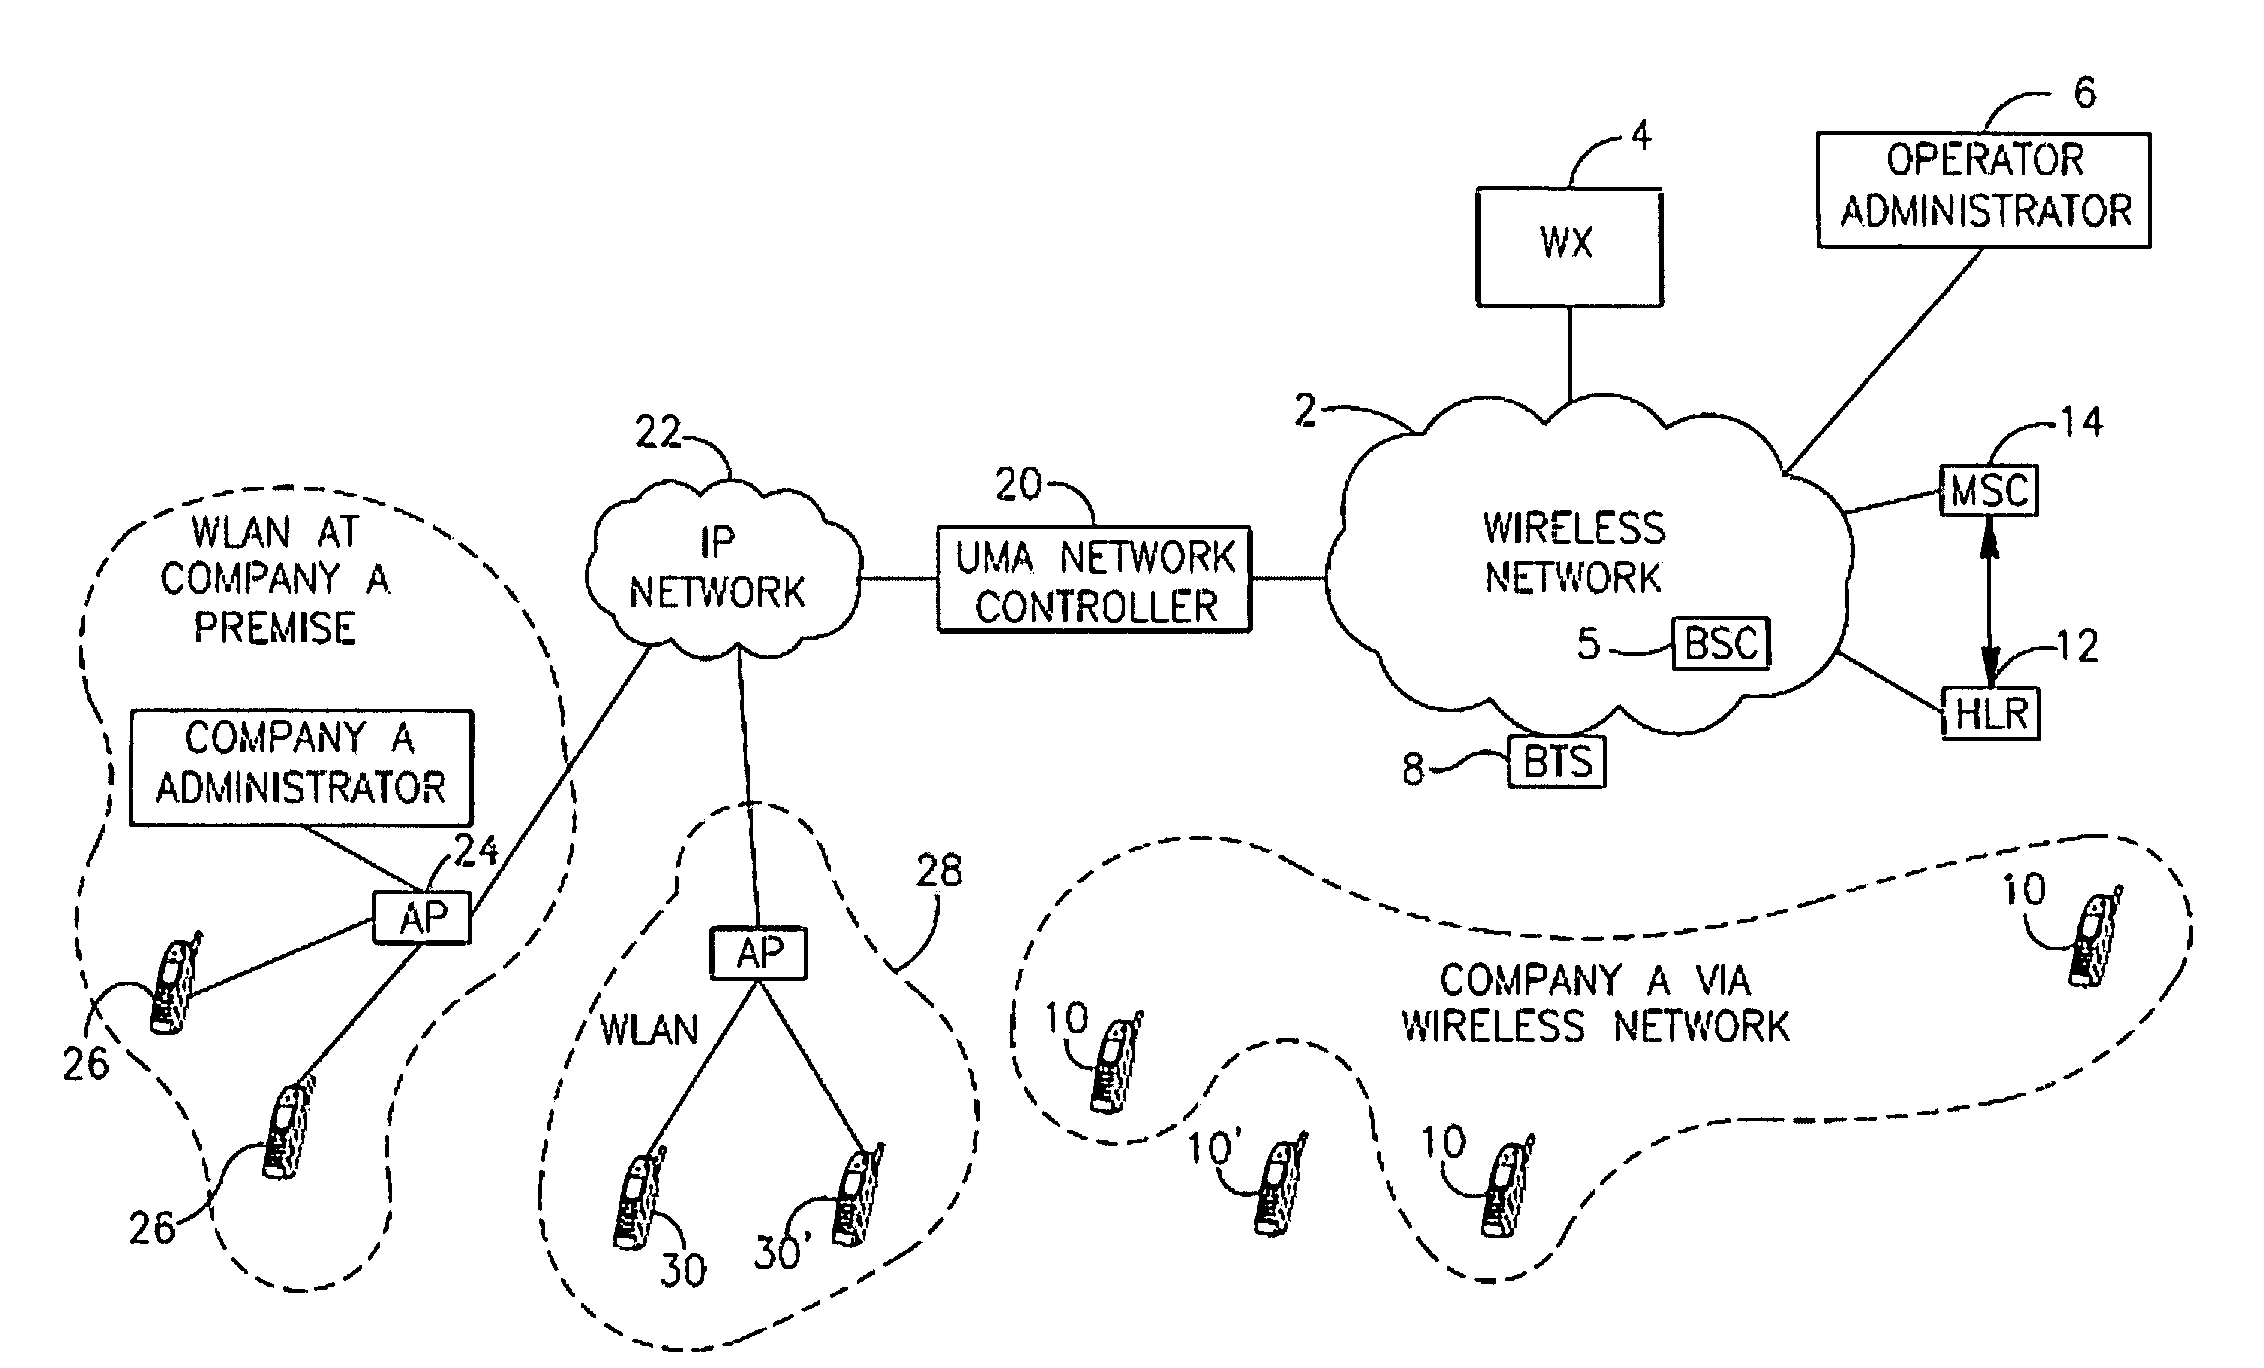 Unstructured Supplementary Service Data Application within a Wireless Network